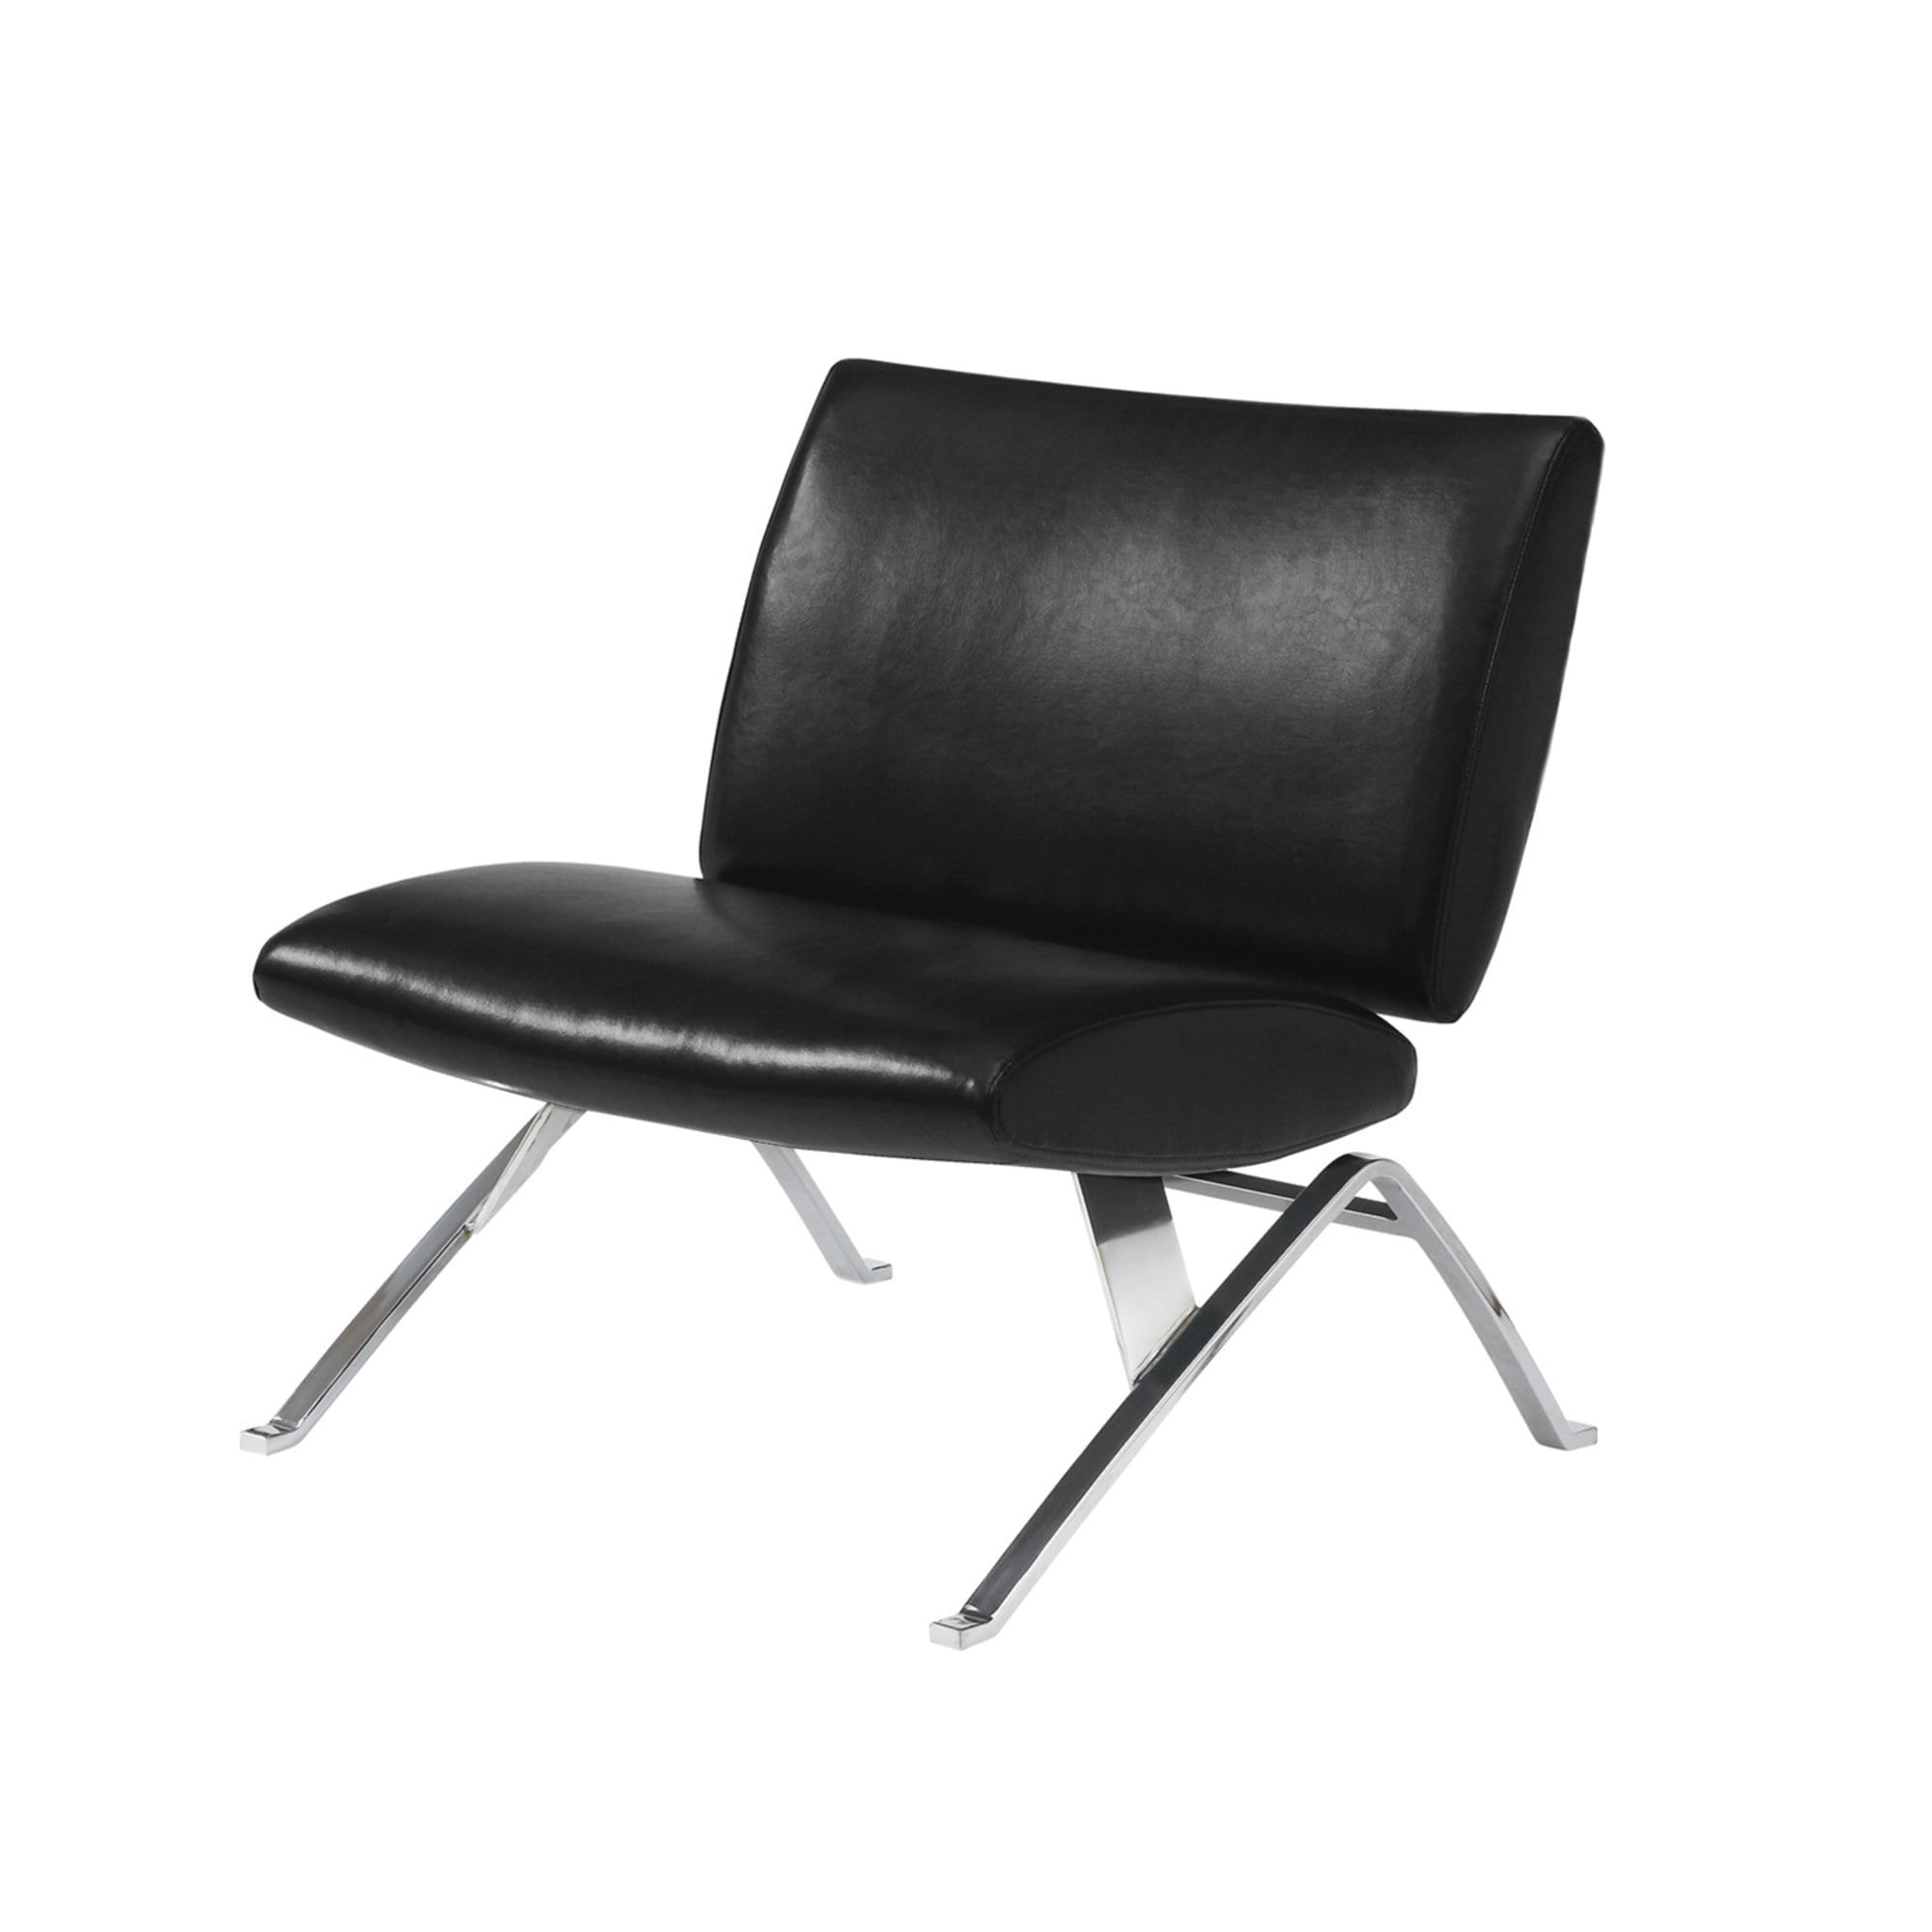 Shop Black Leather-Look / Chrome Metal Modern Accent Chair - Free